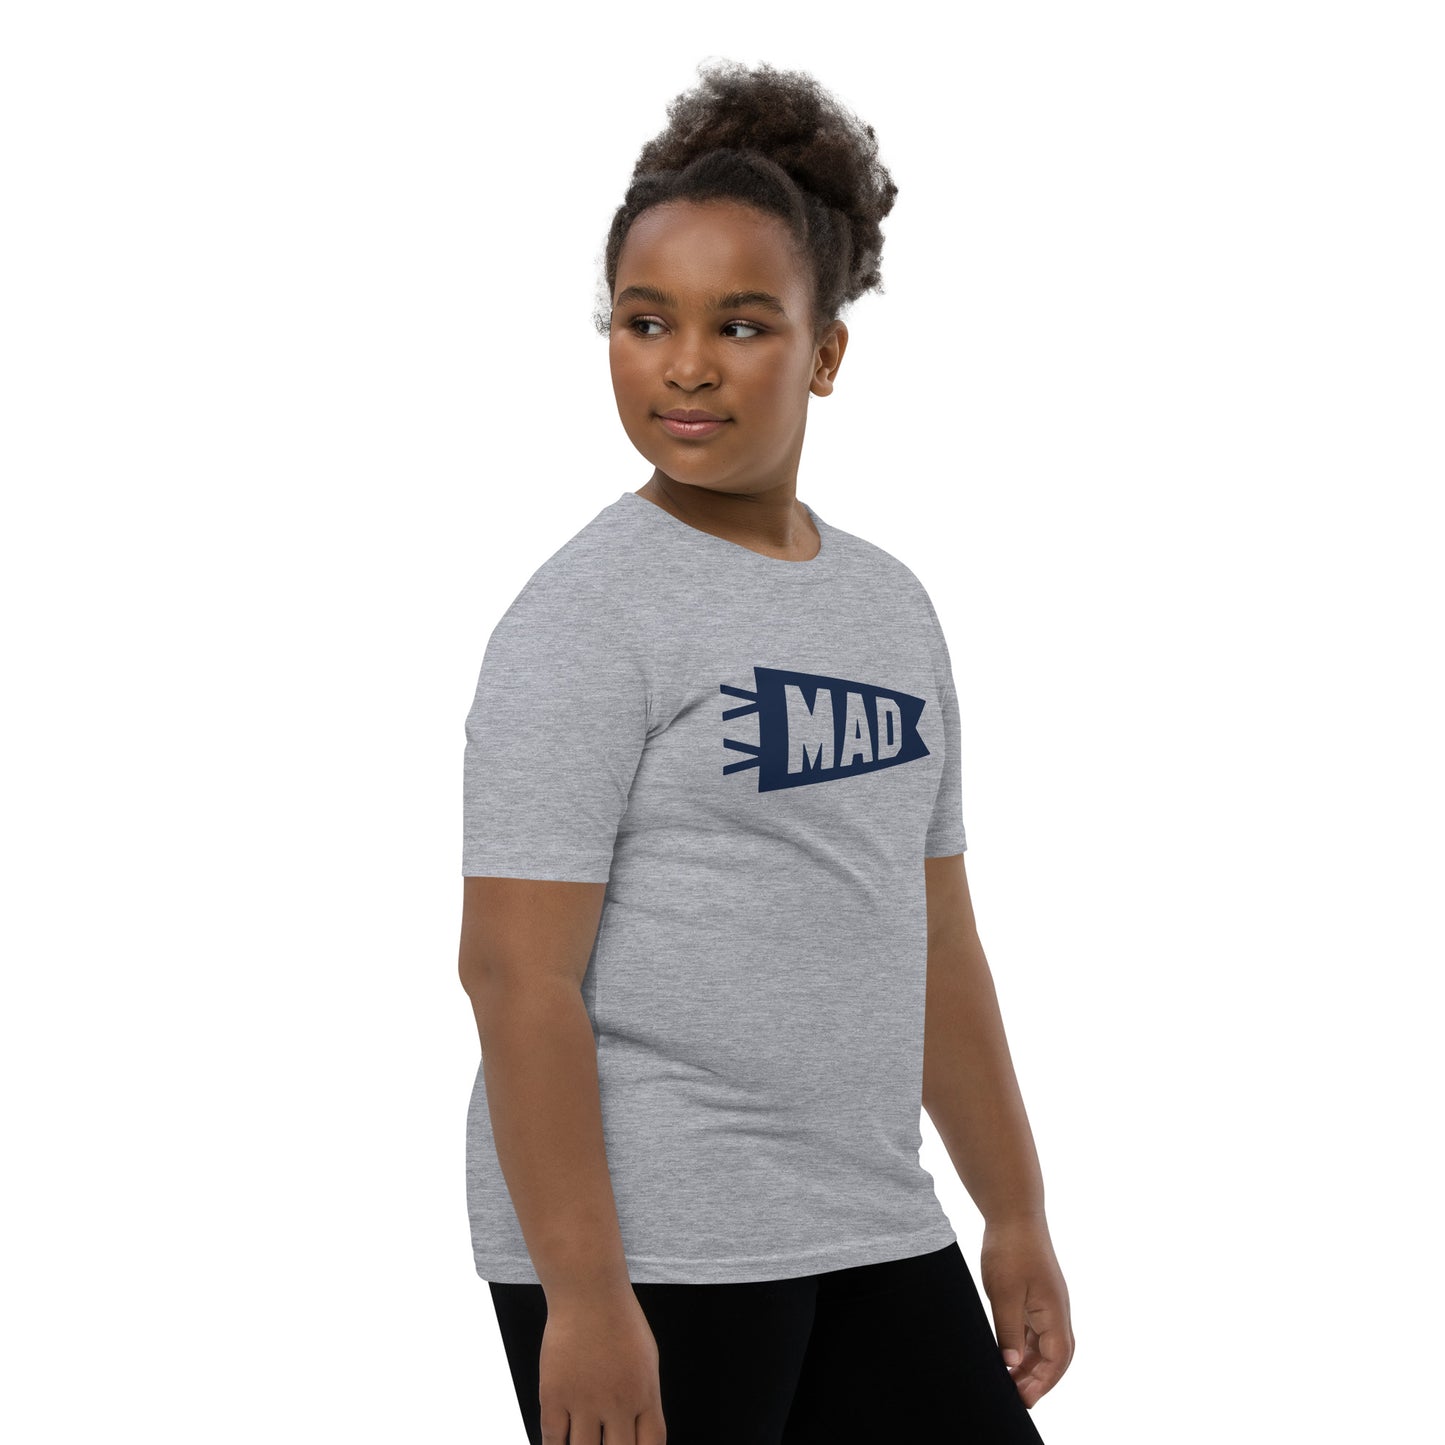 Kid's Airport Code Tee - Navy Blue Graphic • MAD Madrid • YHM Designs - Image 03